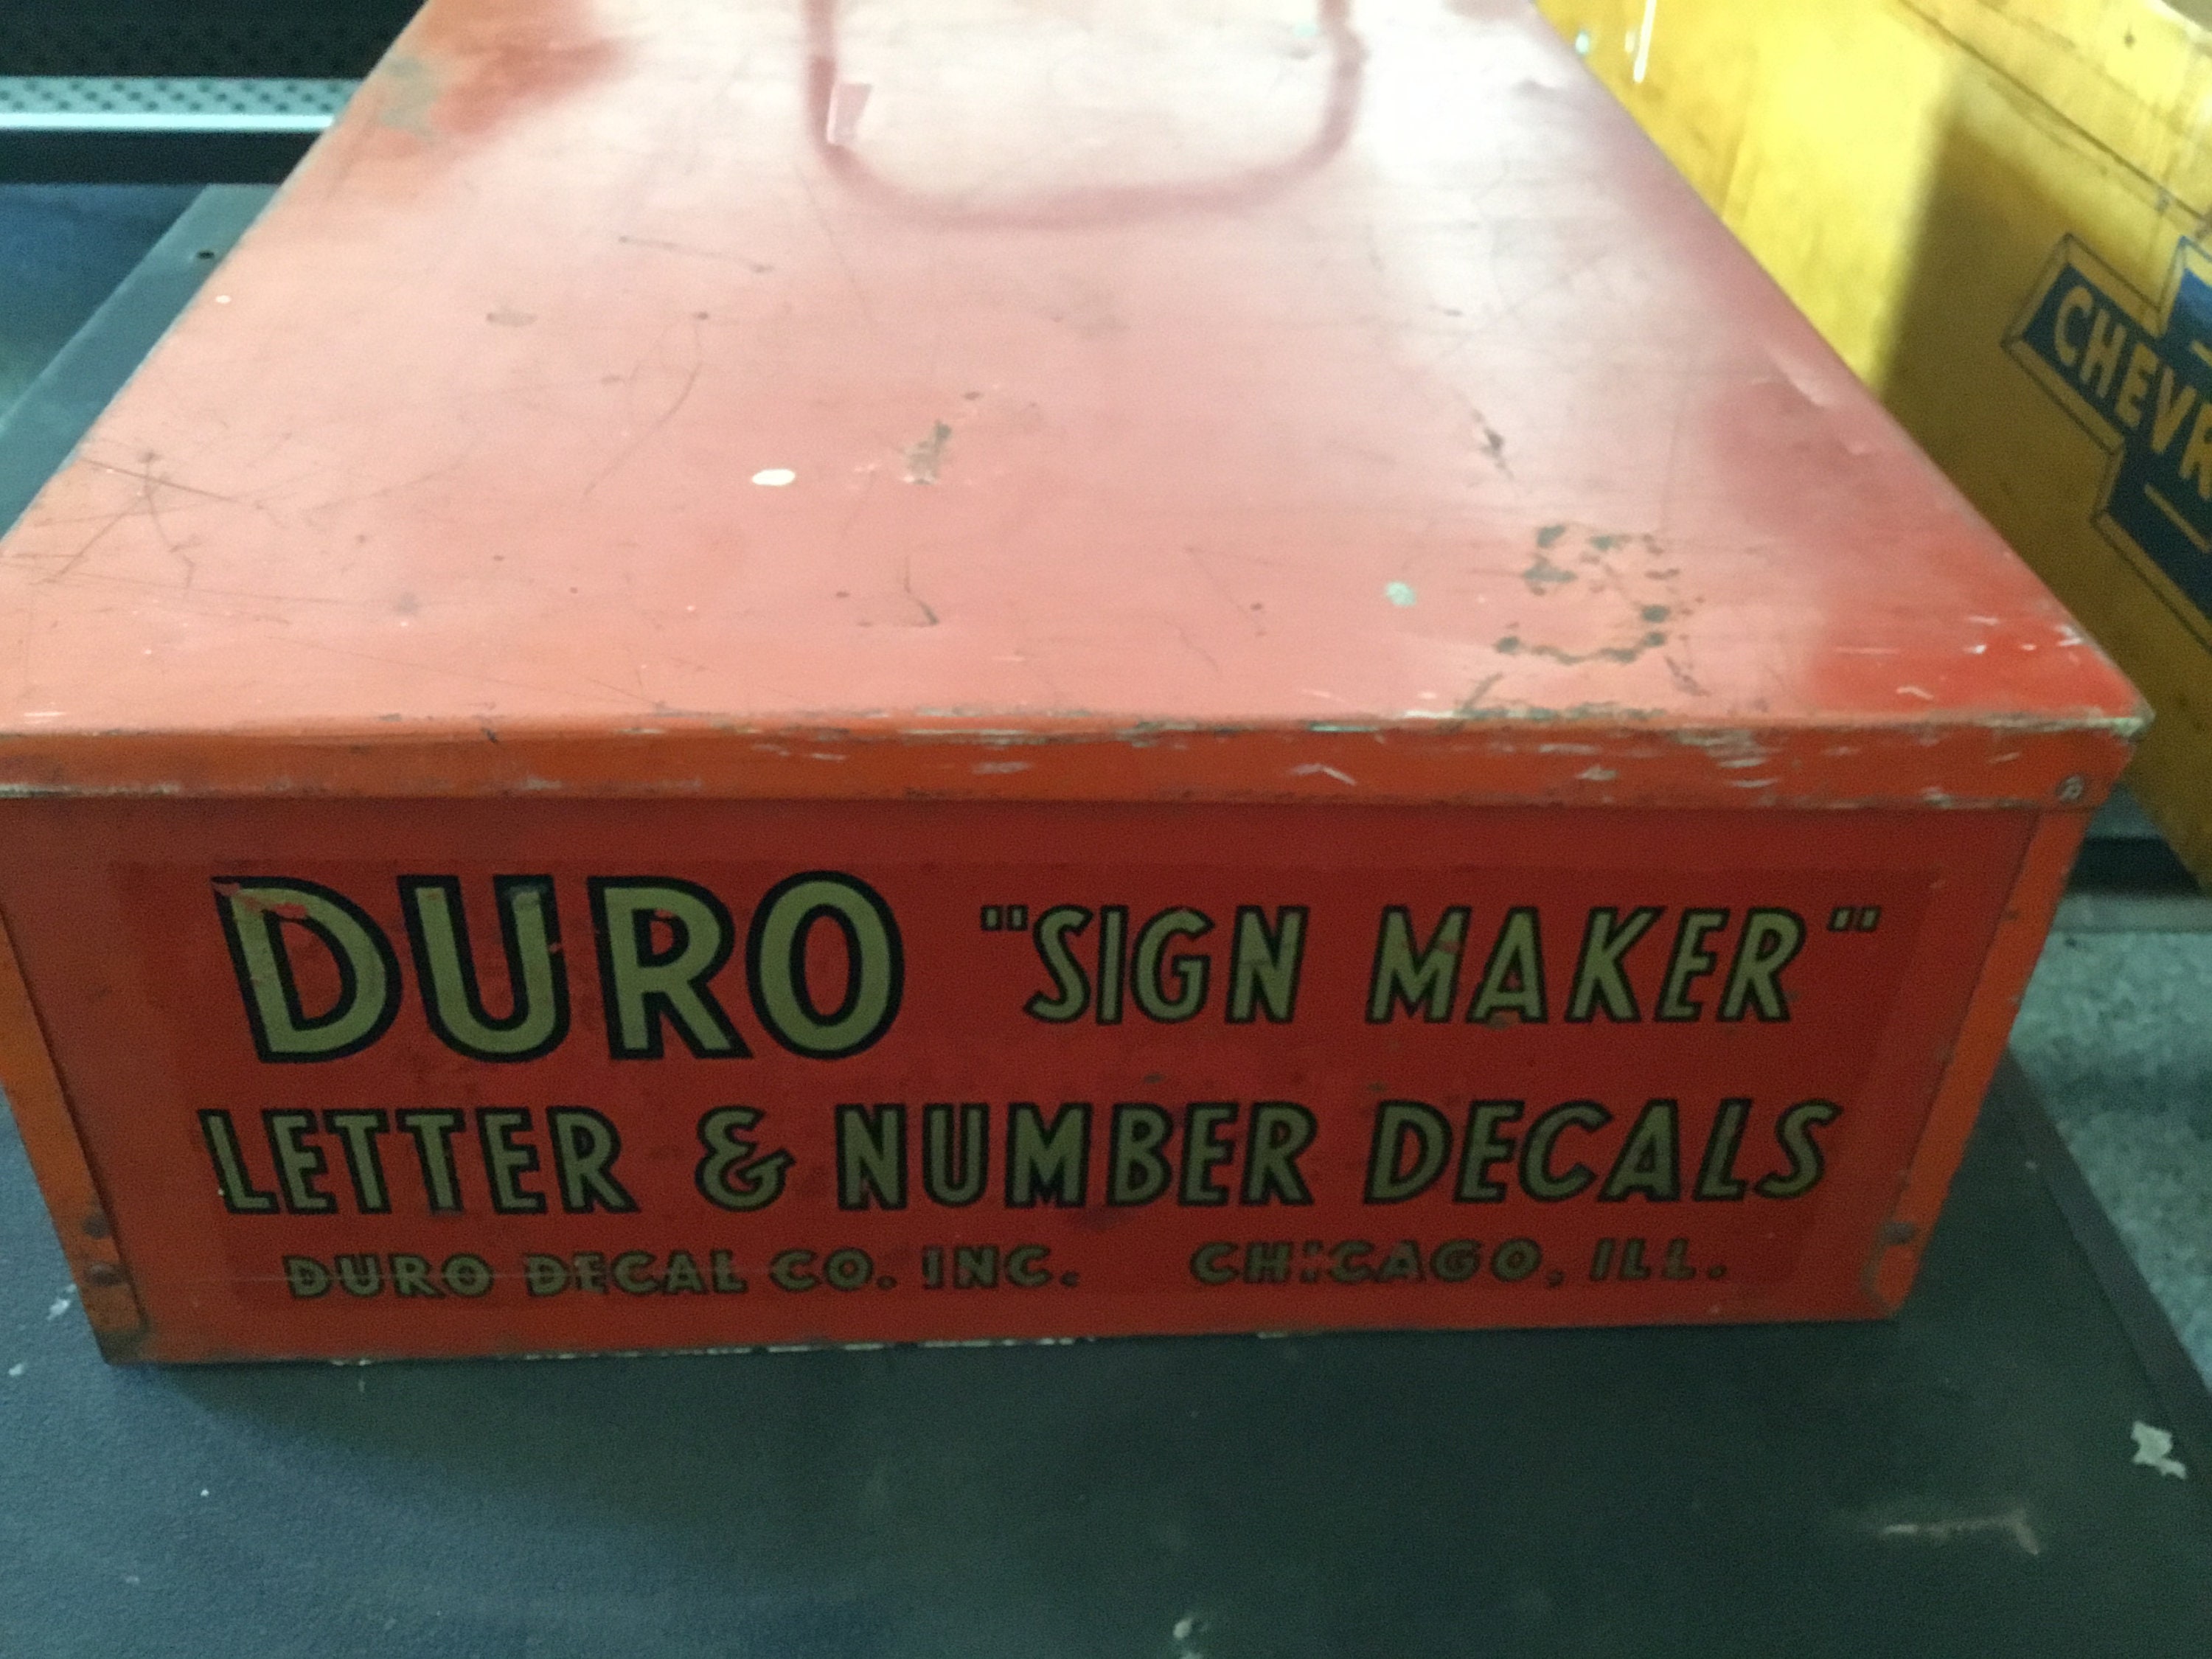 DURO SIGN MAKER DECALS AND BOX ORIGINAL STORE DISPLAY BOXVERY NICE!